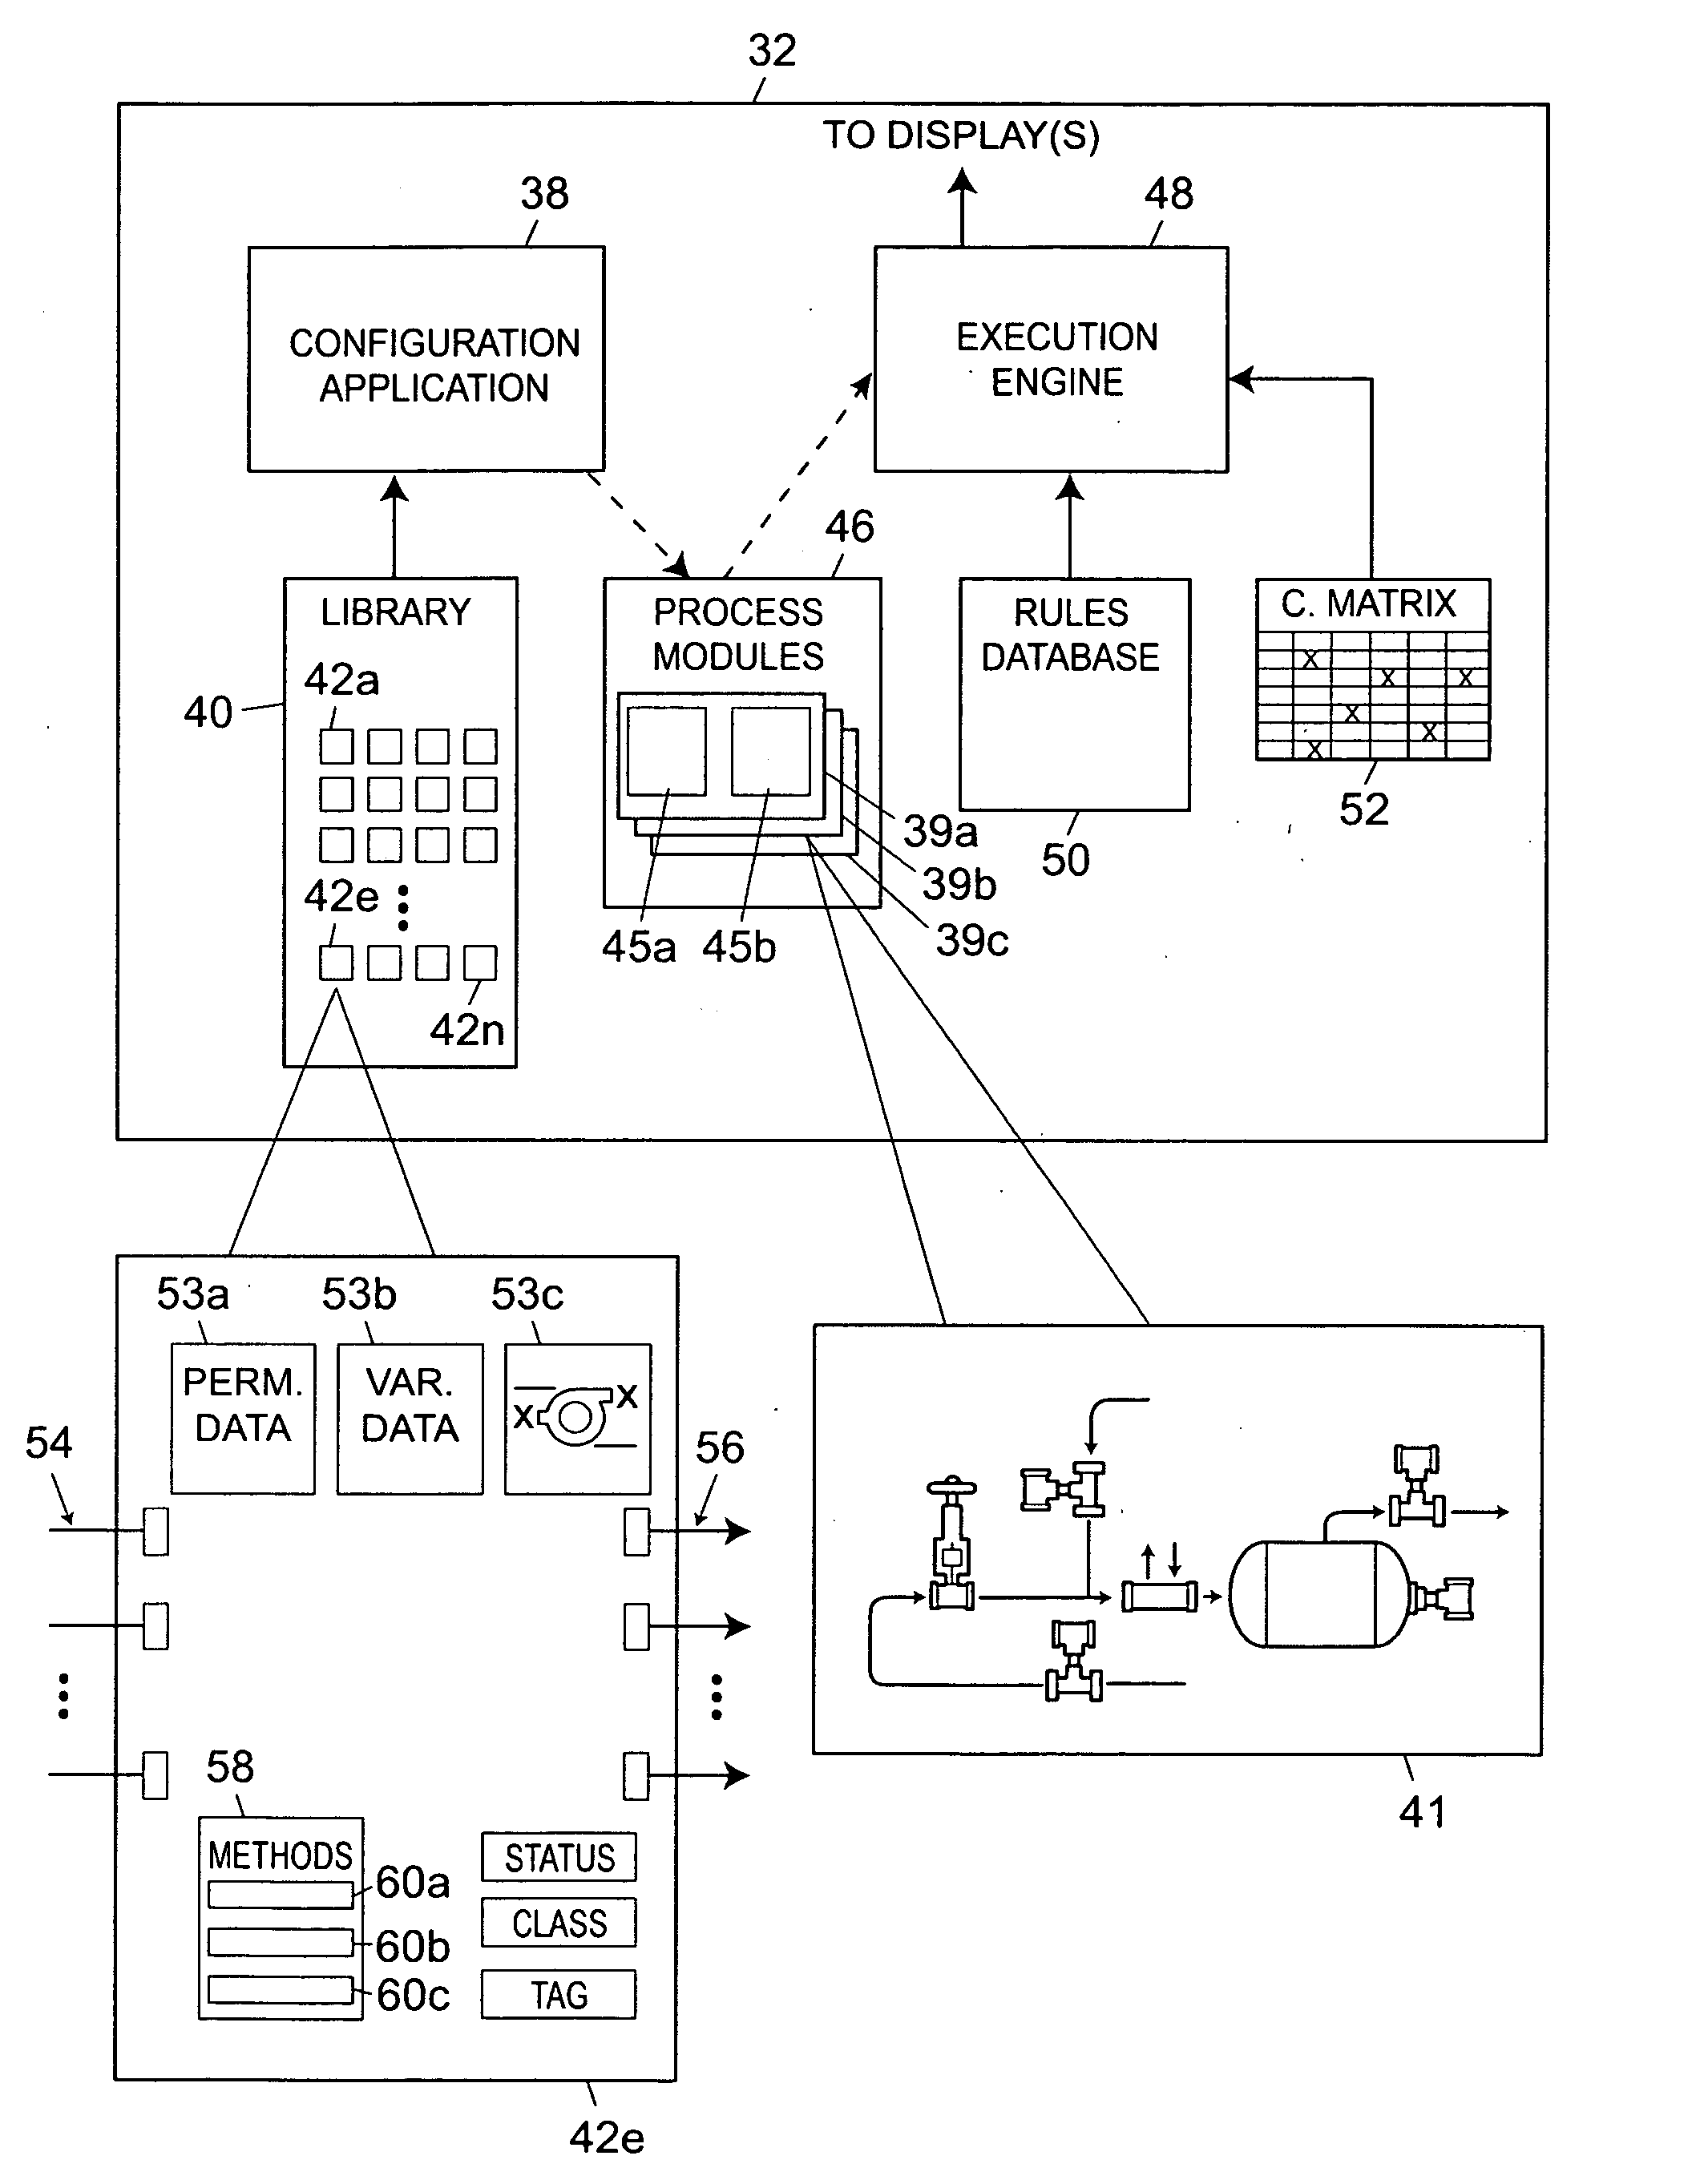 Integrated configuration system for use in a process plant